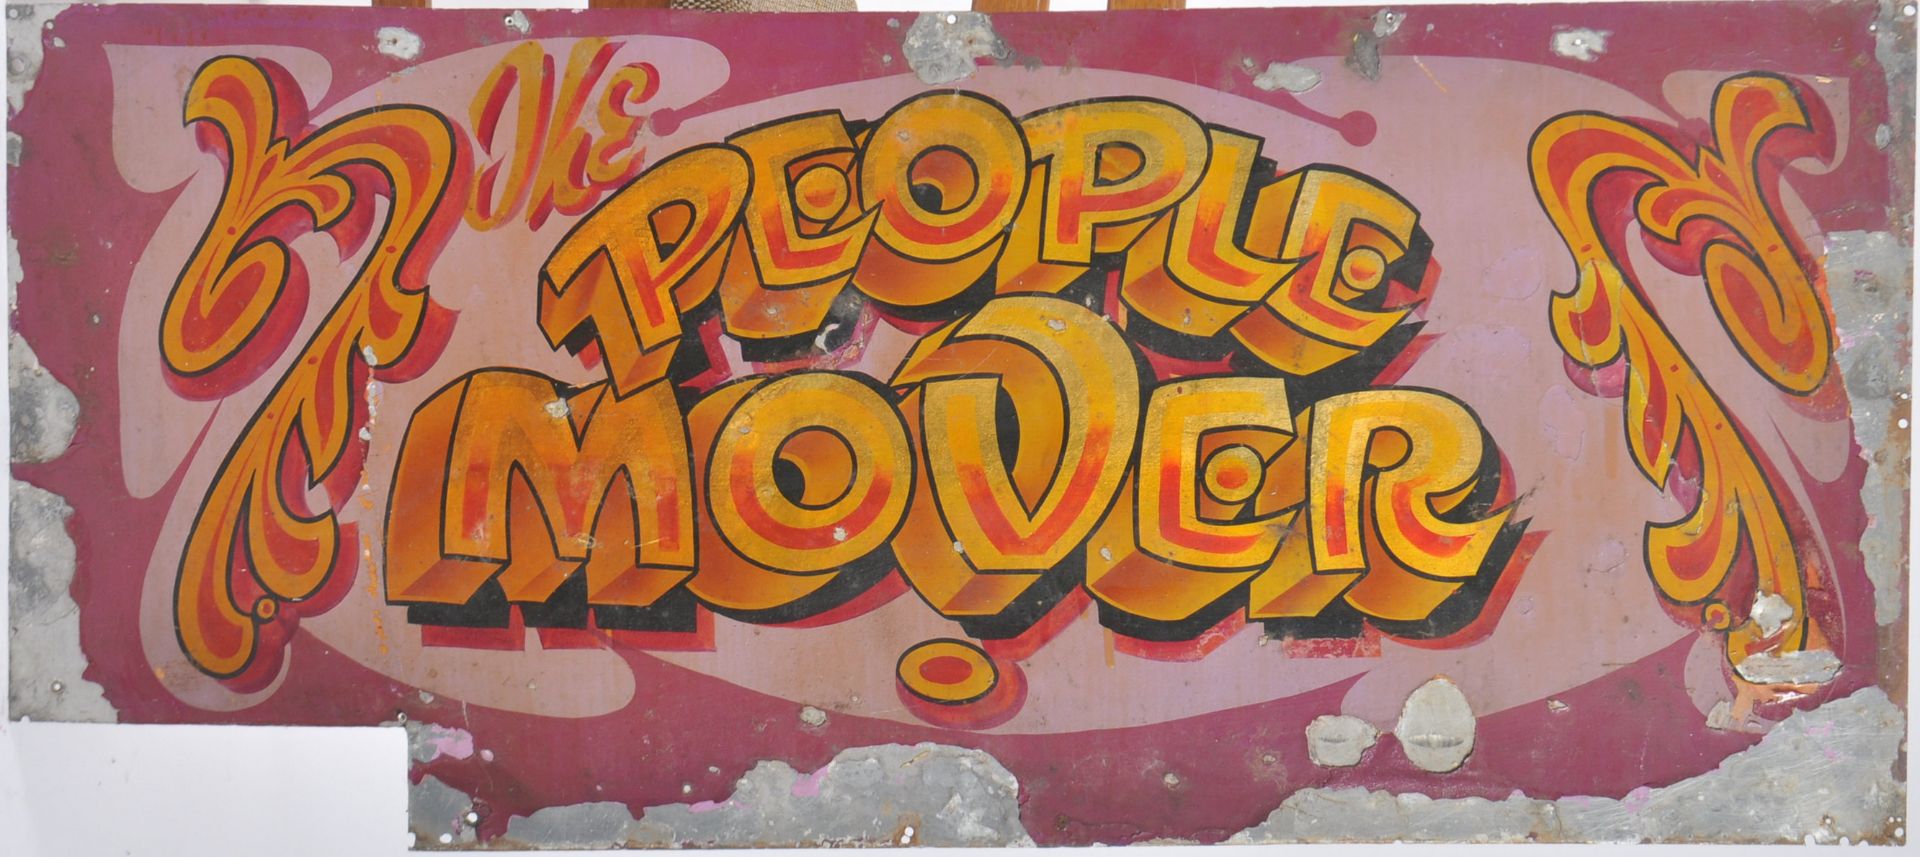 THE PEOPLE MOVER - VINTAGE FAIRGROUND METAL SIGN